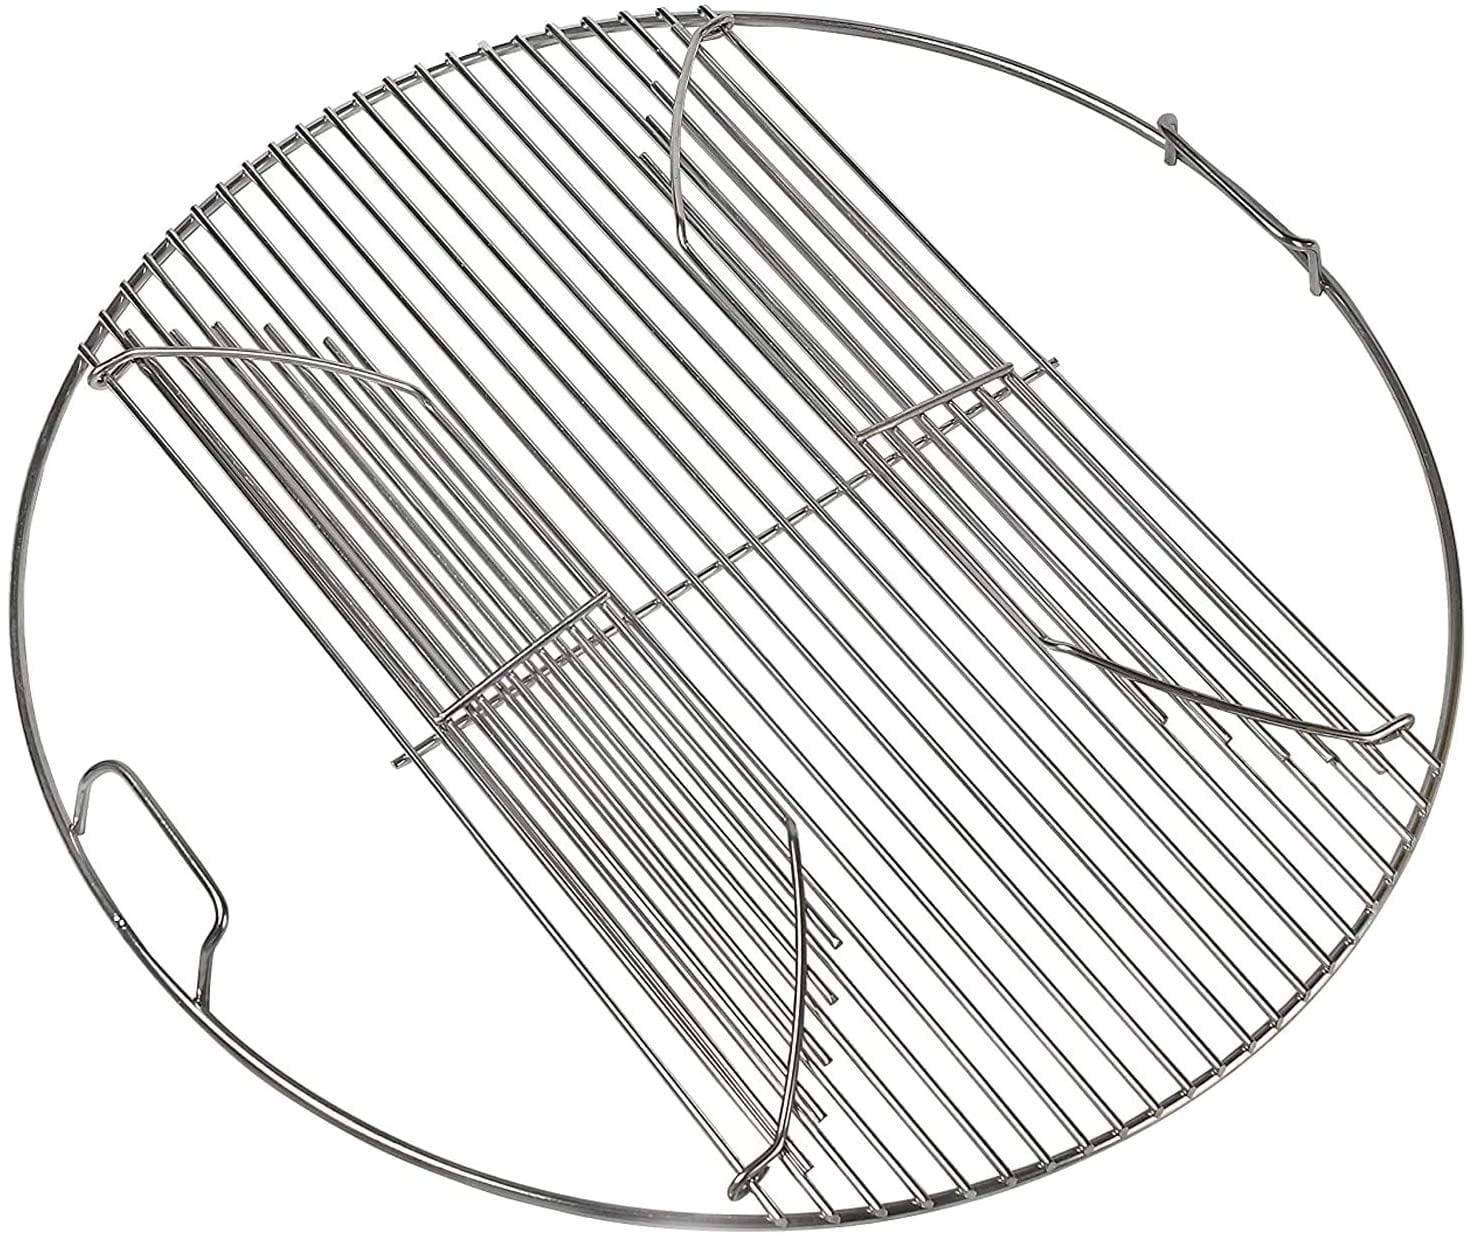 Noa Store Inch Stainless Steel Grill Grate Round Hinged Cooking